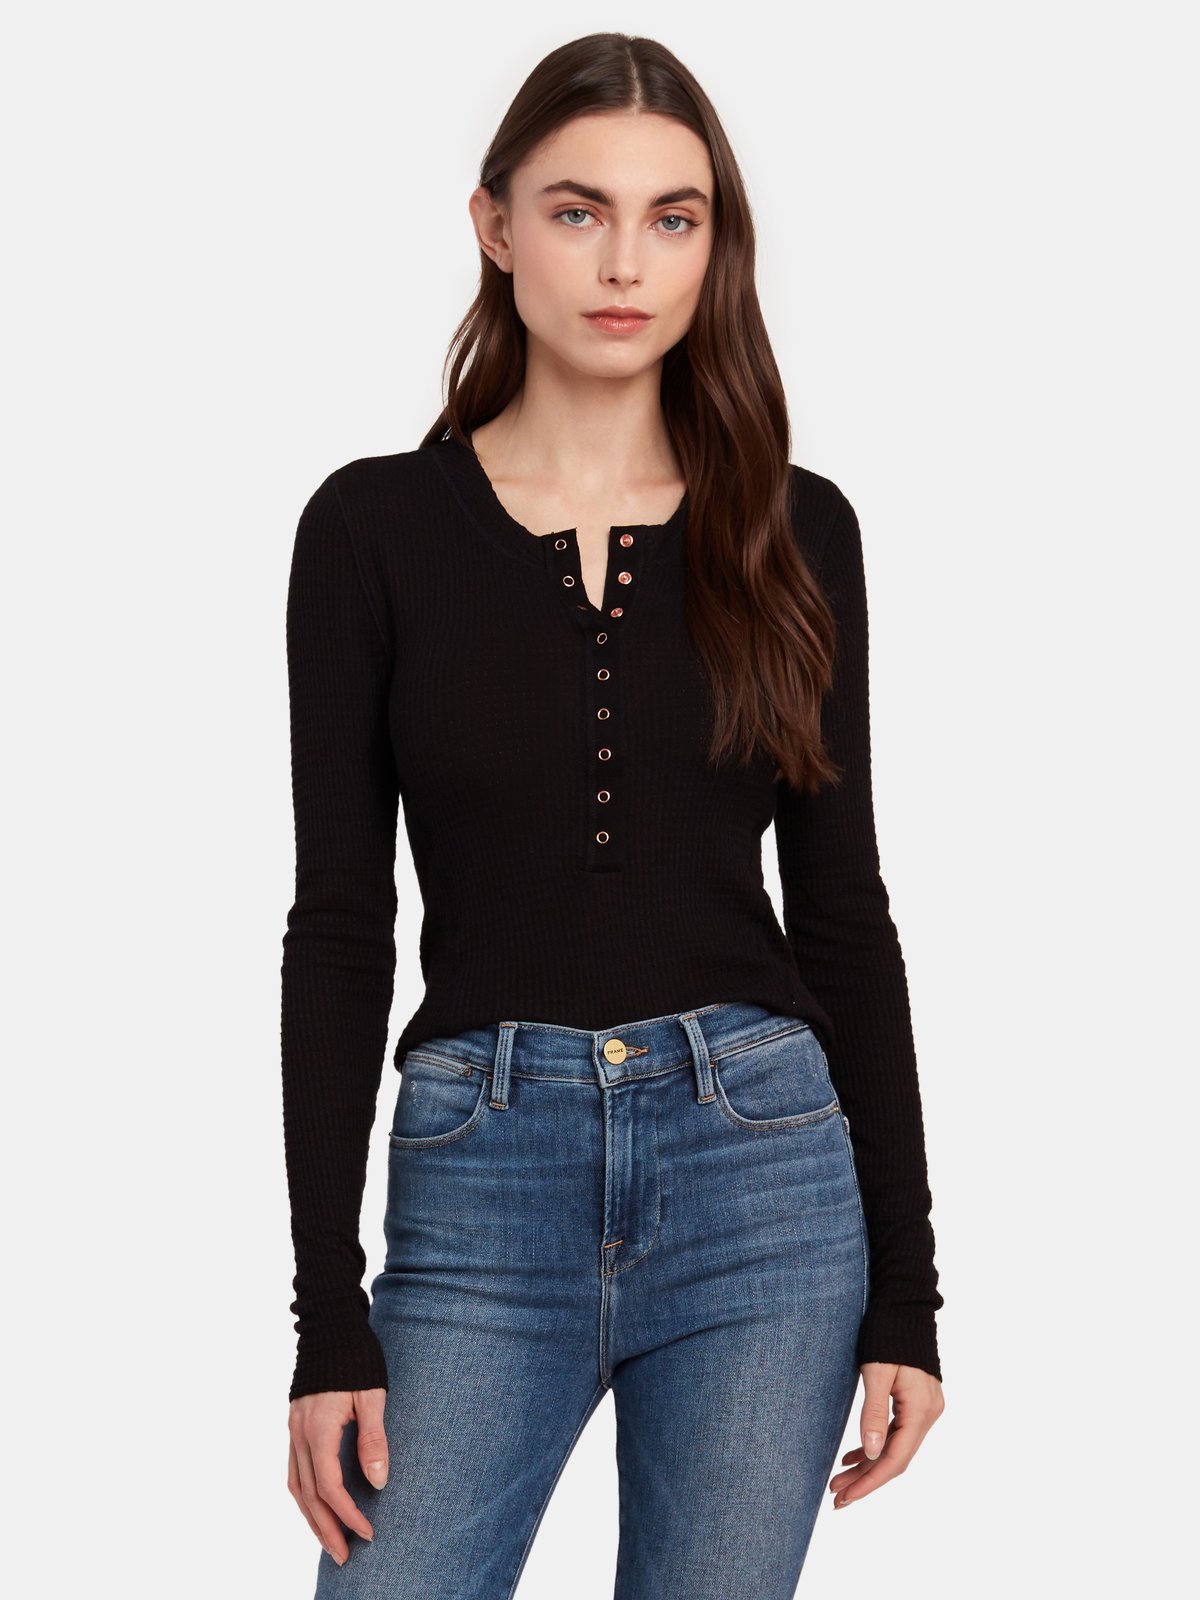 Free People One of the Girls Henley | Verishop